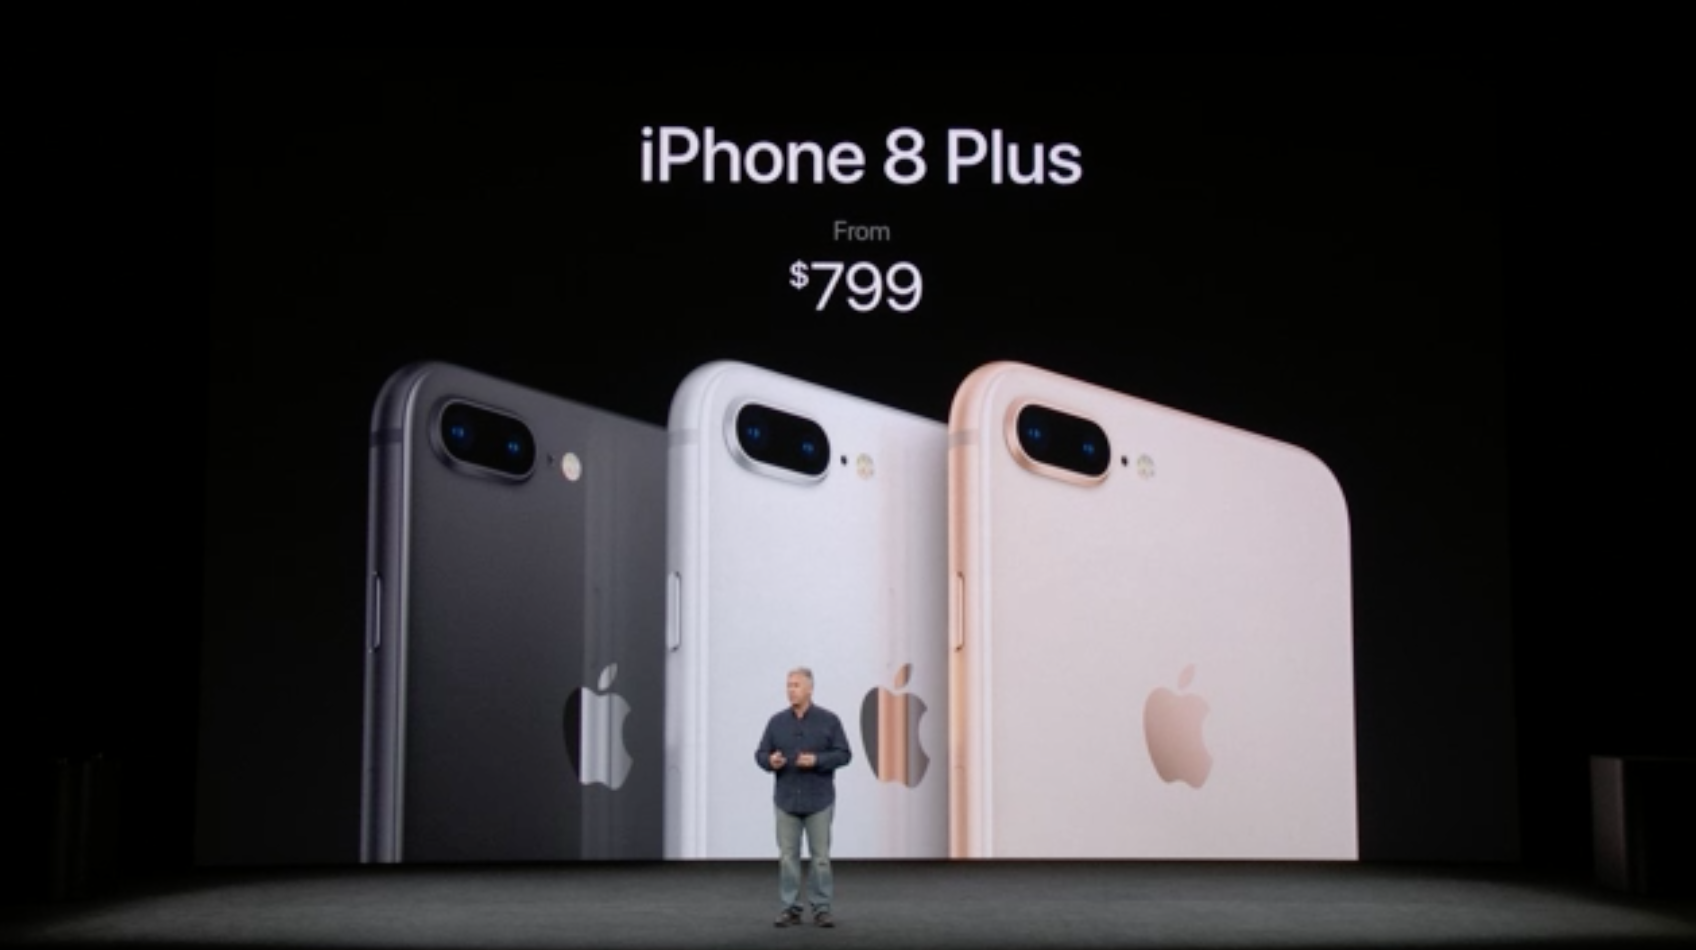 Apple's iPhone 8, 8 Plus priced for South Africa » Stuff